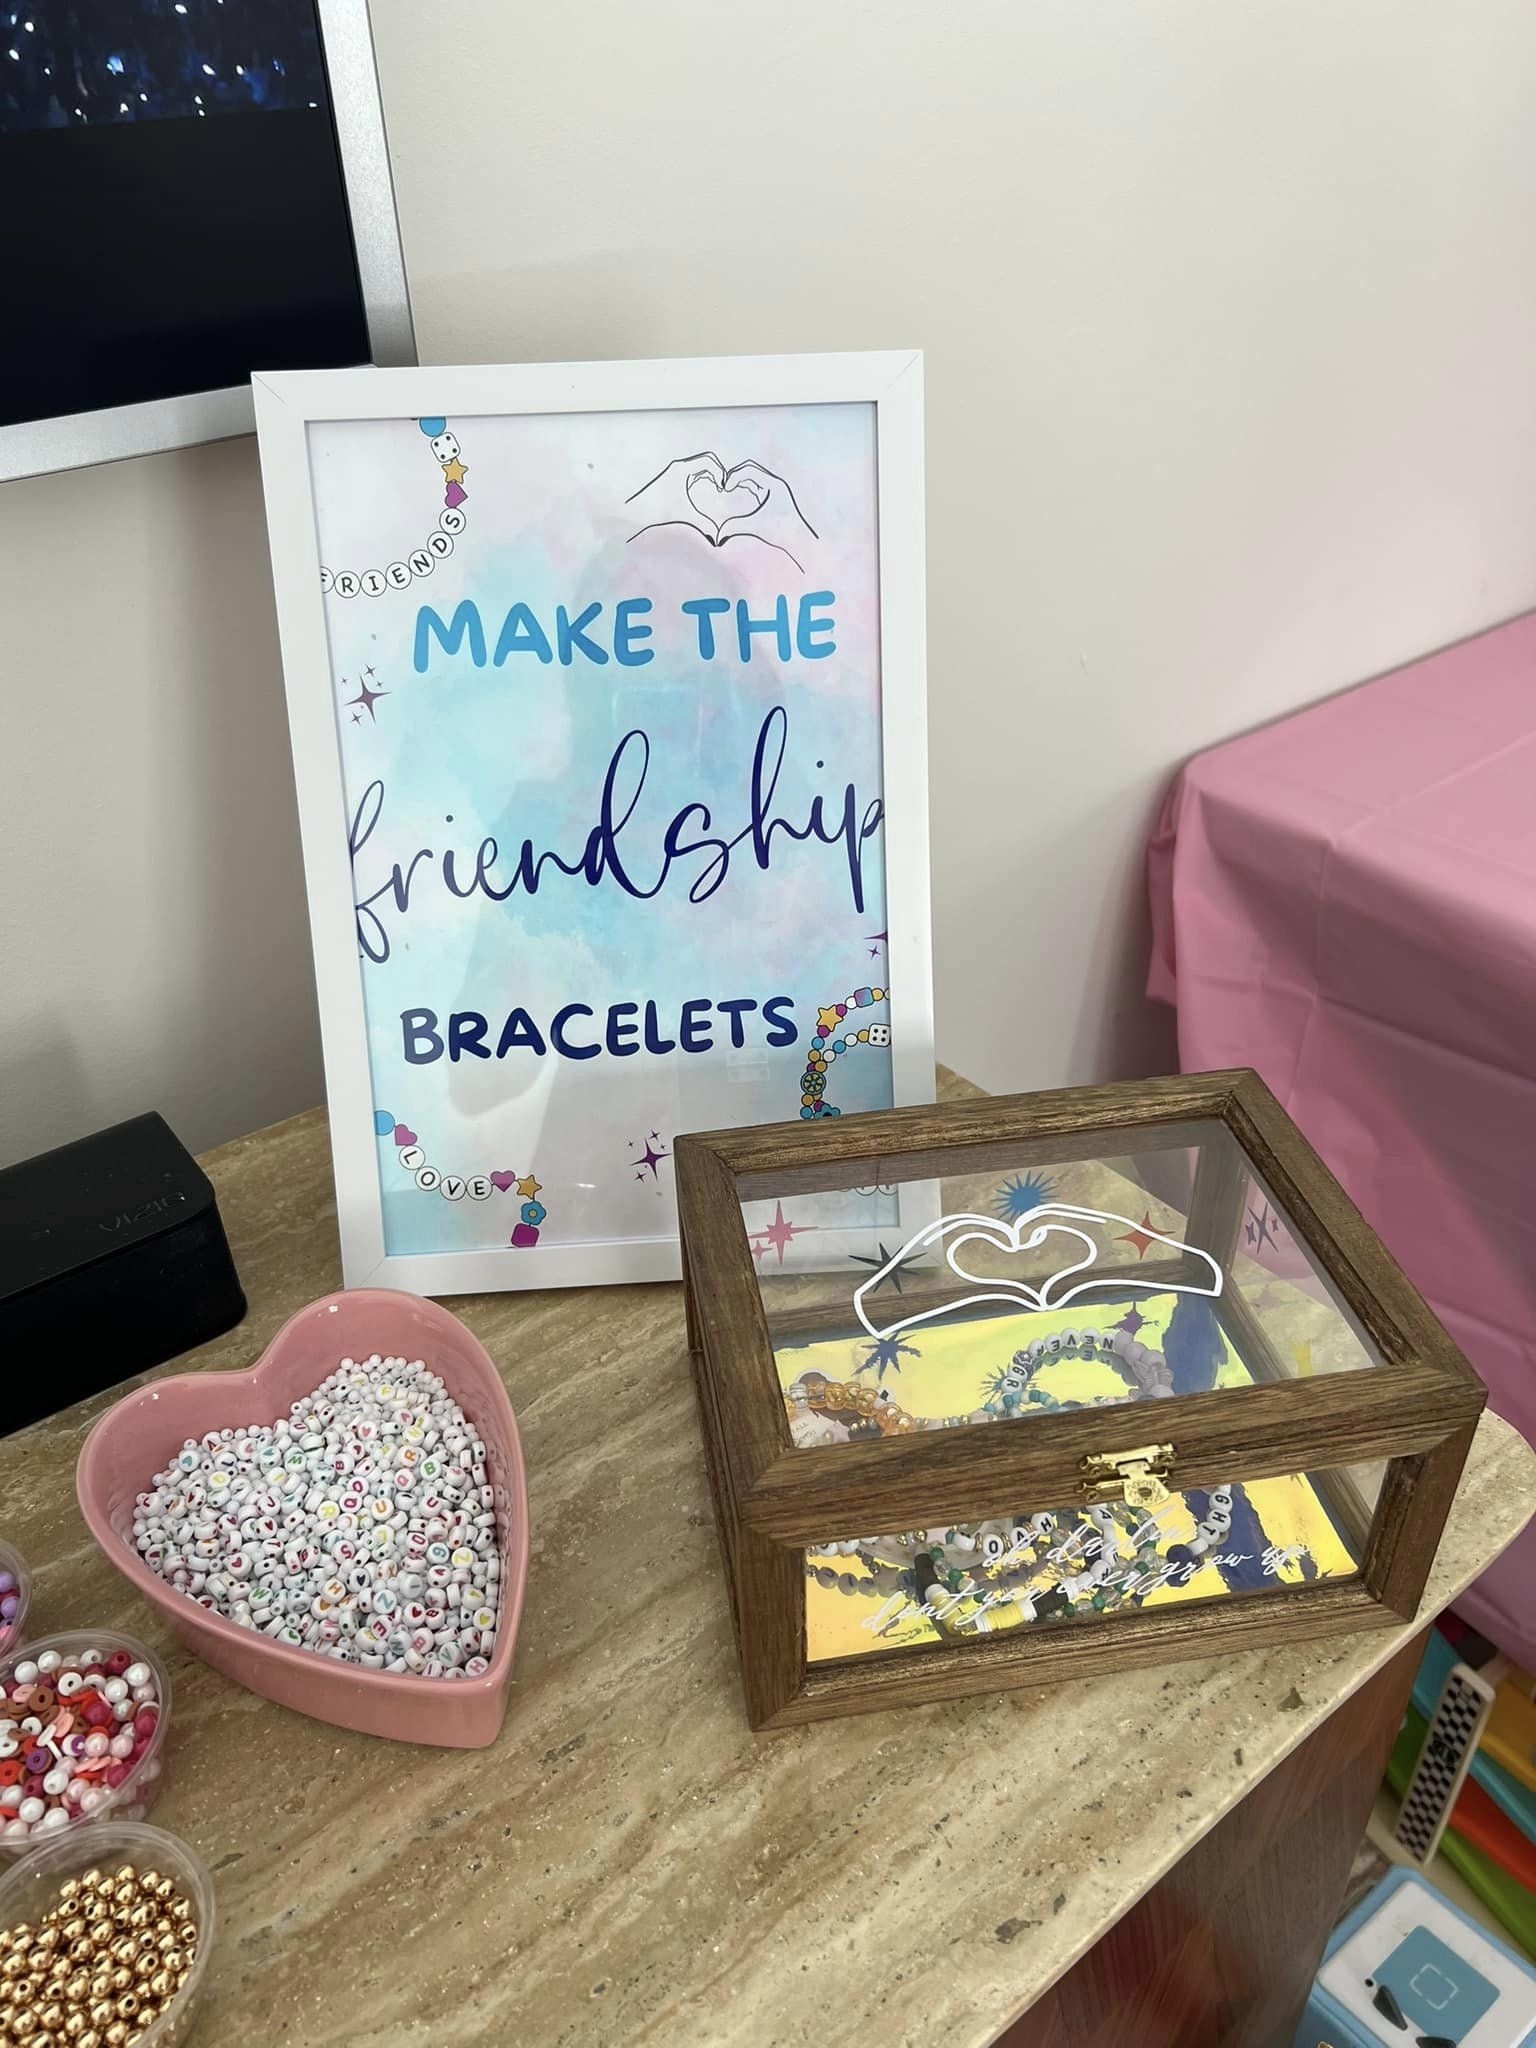 Crafting supplies and a sign that says &quot;MAKE THE friendship BRACELETS&quot; on a table with beads and strings for bracelet making